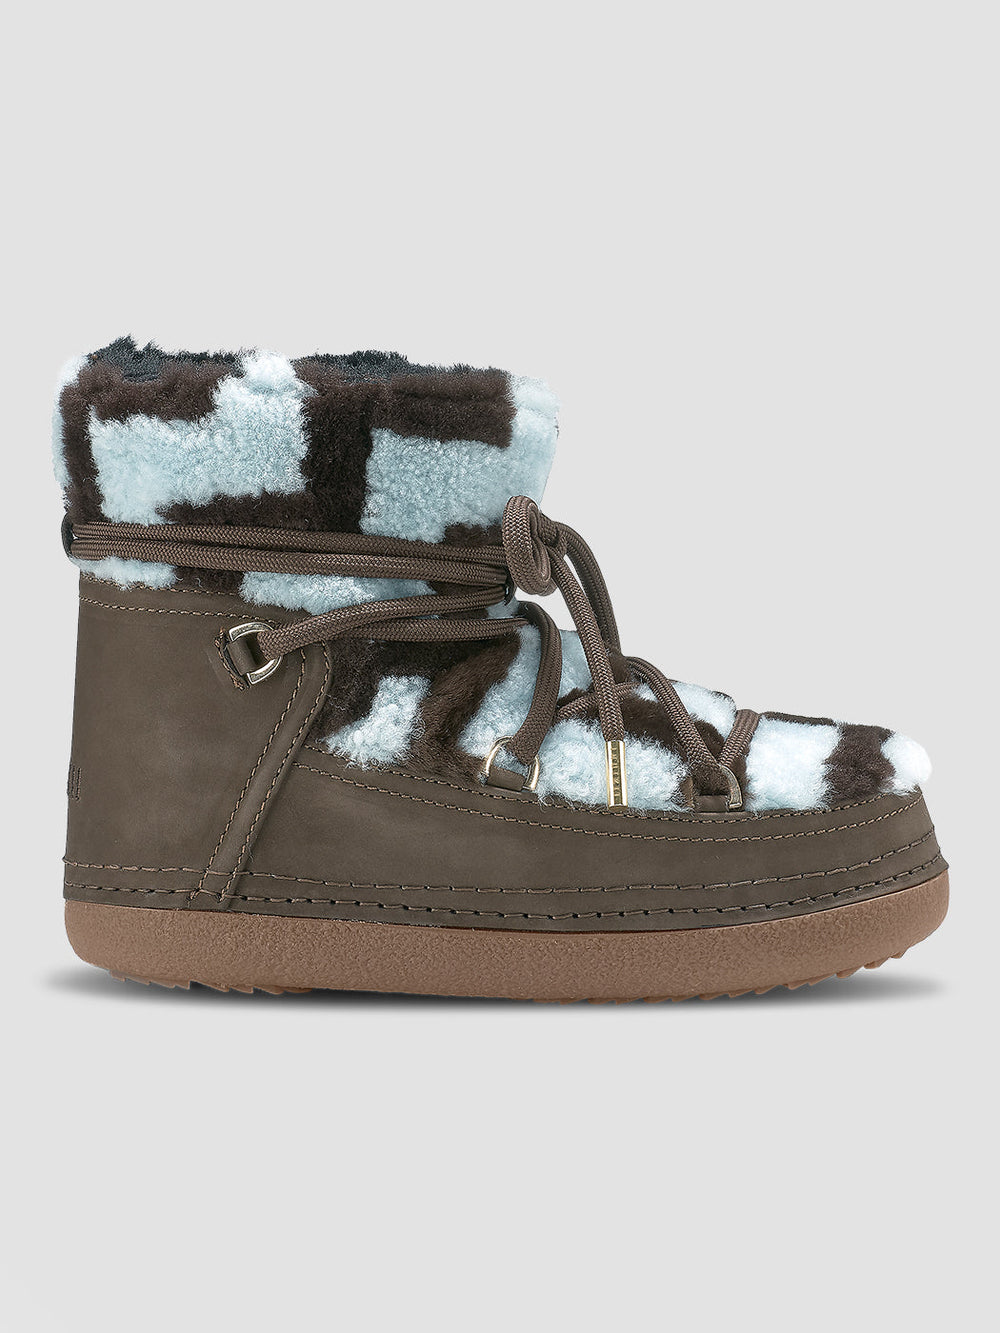 Carbon38 - Shearling – Blue Zigzag